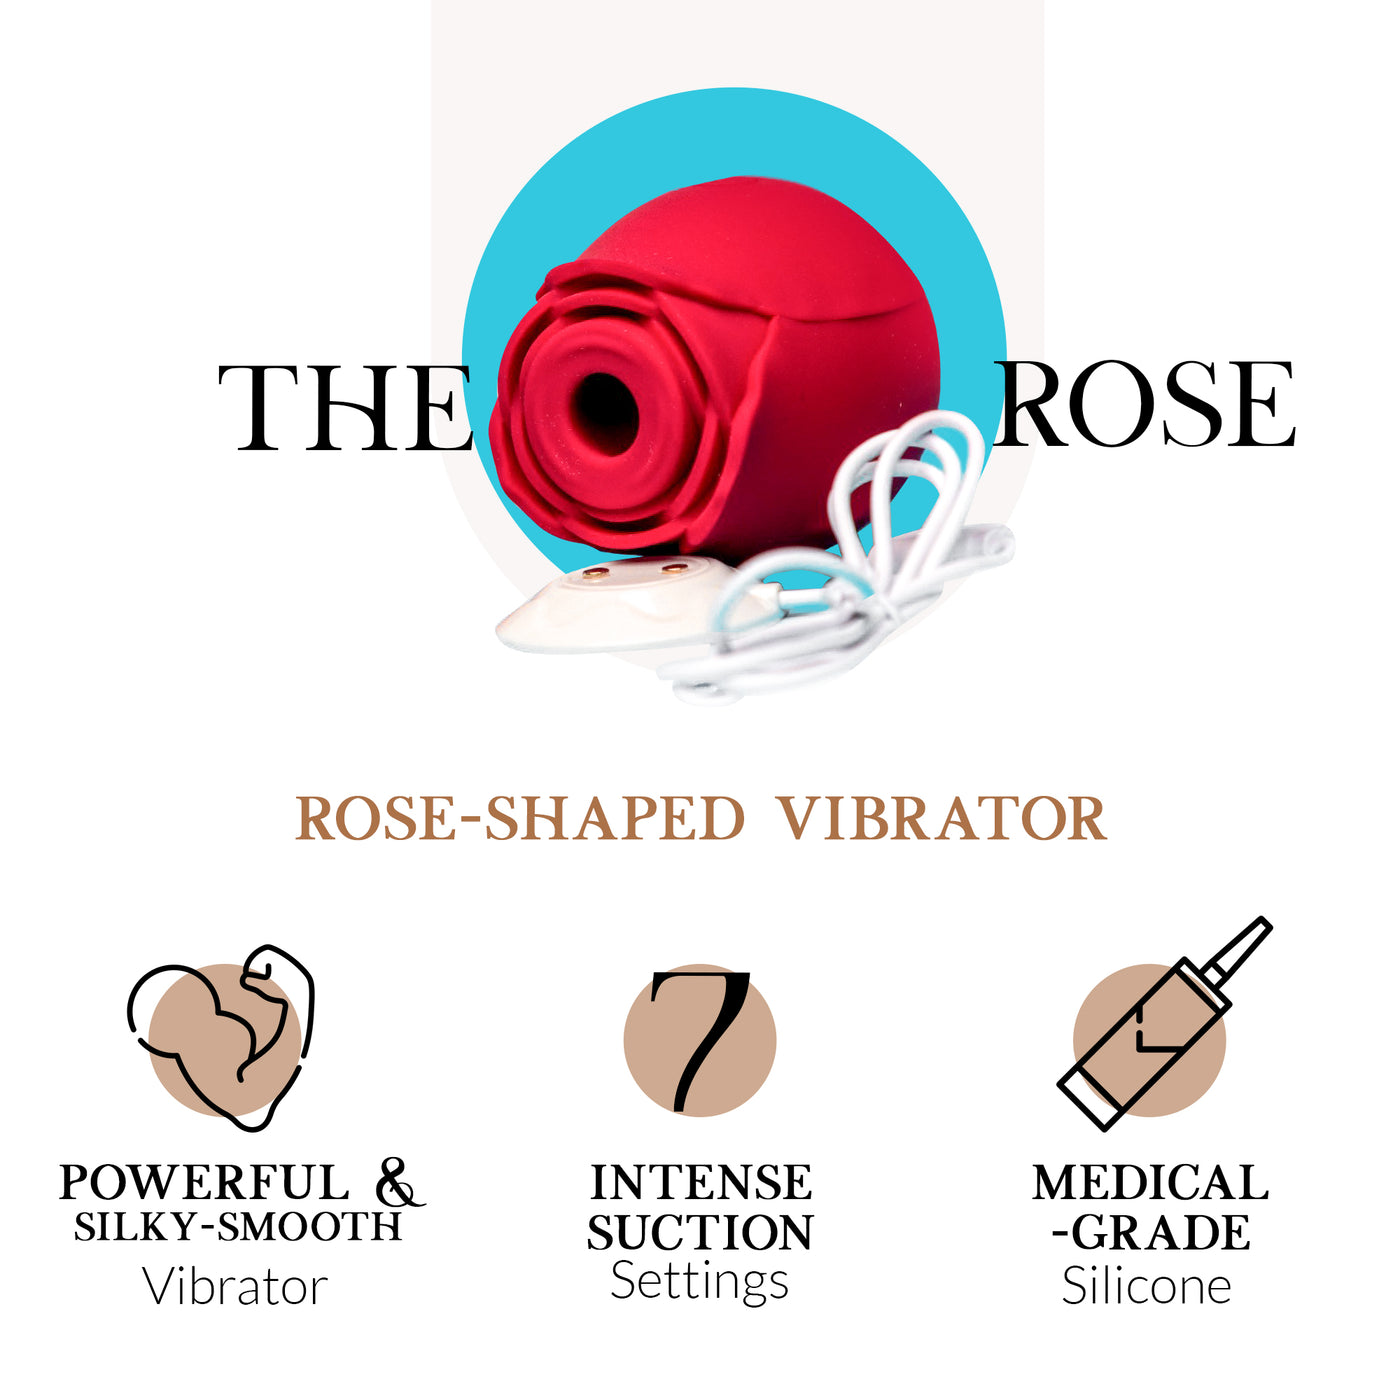 Yoni Oil Gift Set. Rose Toy Moisturizer and Soothing Relief 1 Gift Set (Rose + Yoni Oil)